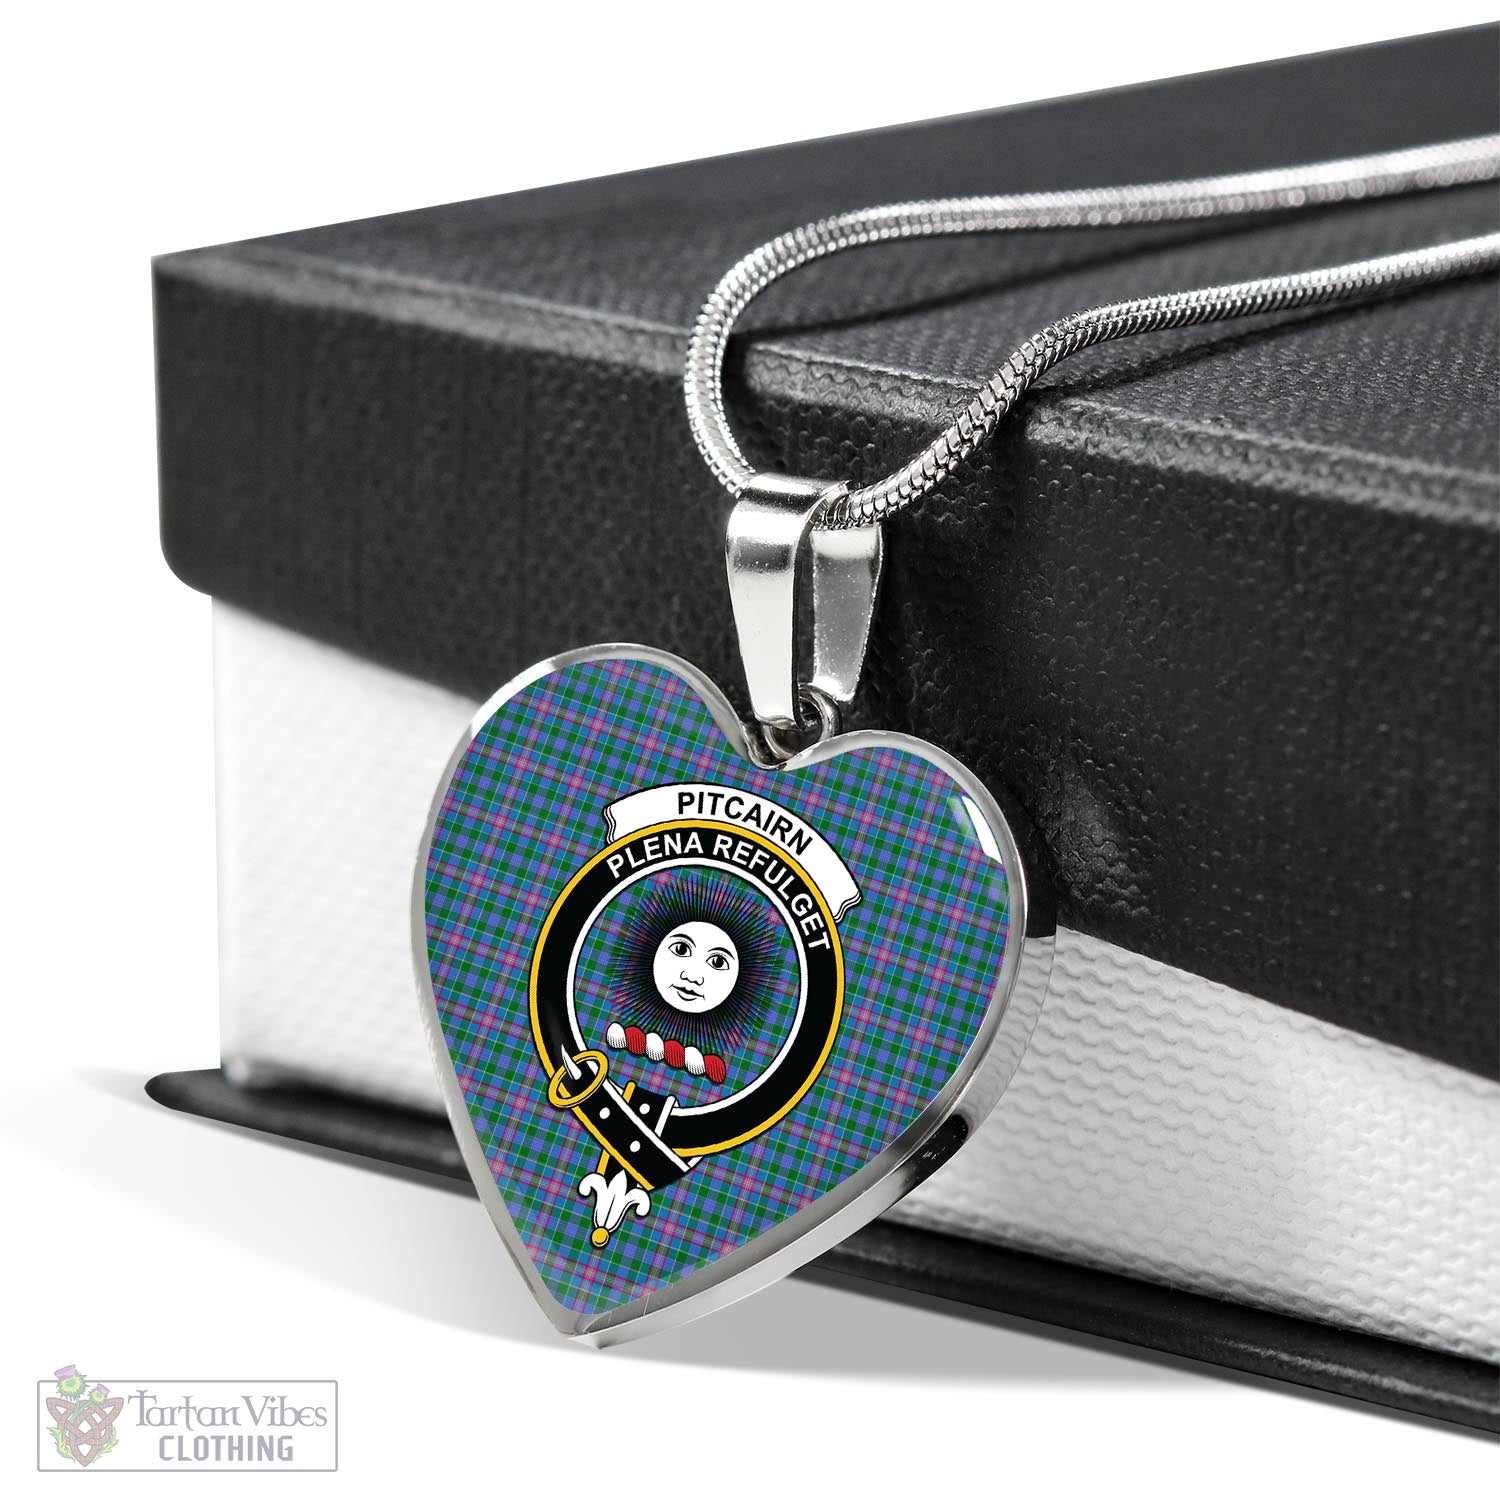 Tartan Vibes Clothing Pitcairn Hunting Tartan Heart Necklace with Family Crest